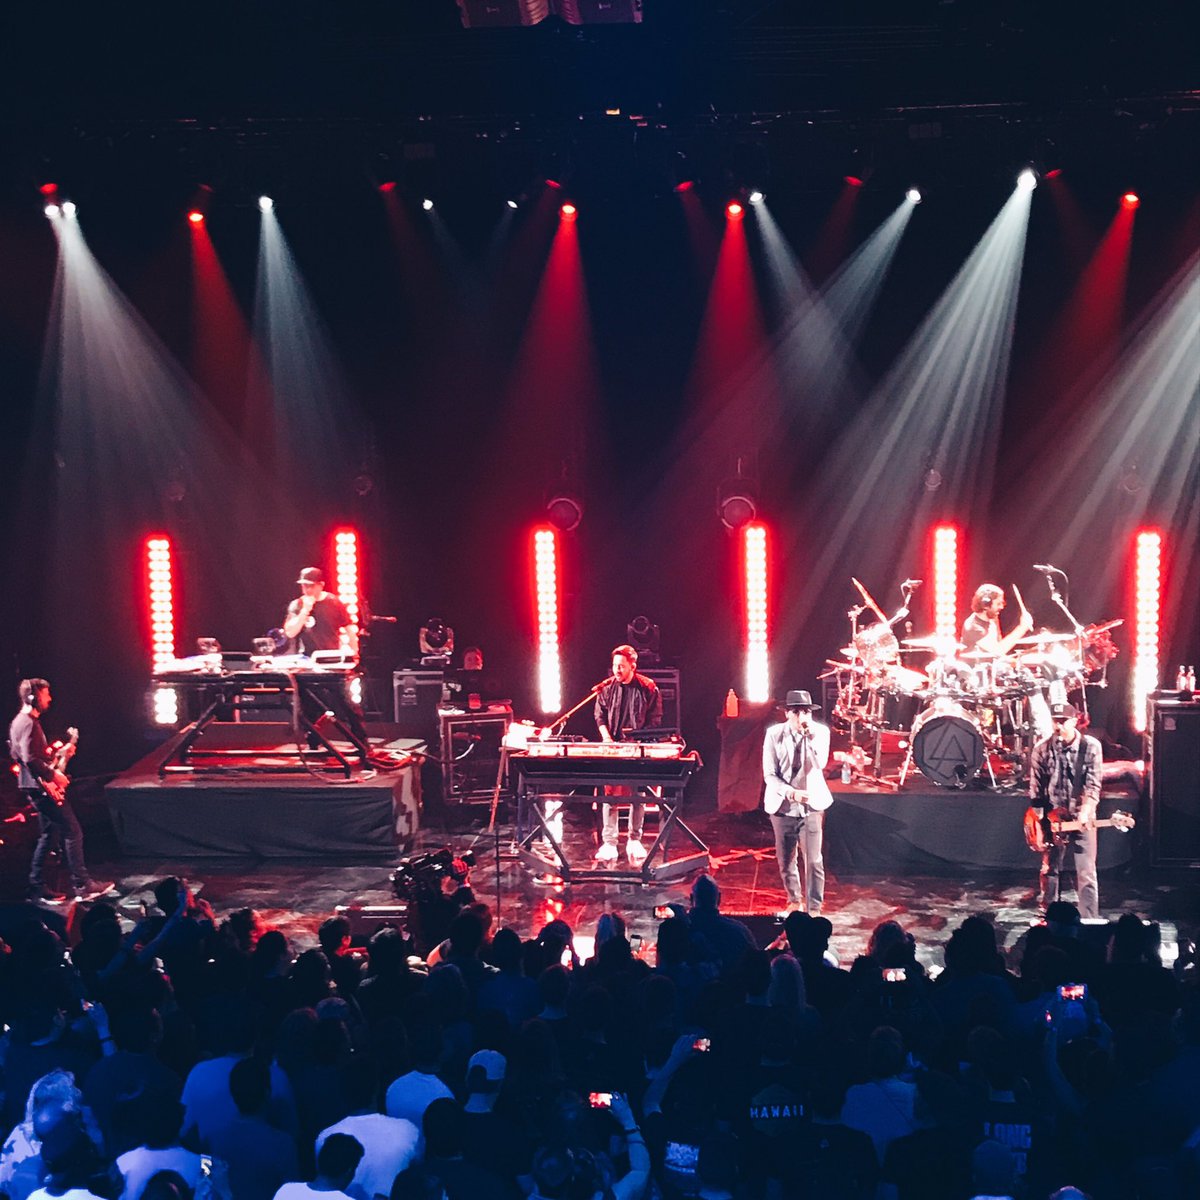 Live from our @iHeartRadio album release party. Watch now at https://t.co/7shqbhYeot #iHeartLinkinPark https://t.co/RqdrShDNN0